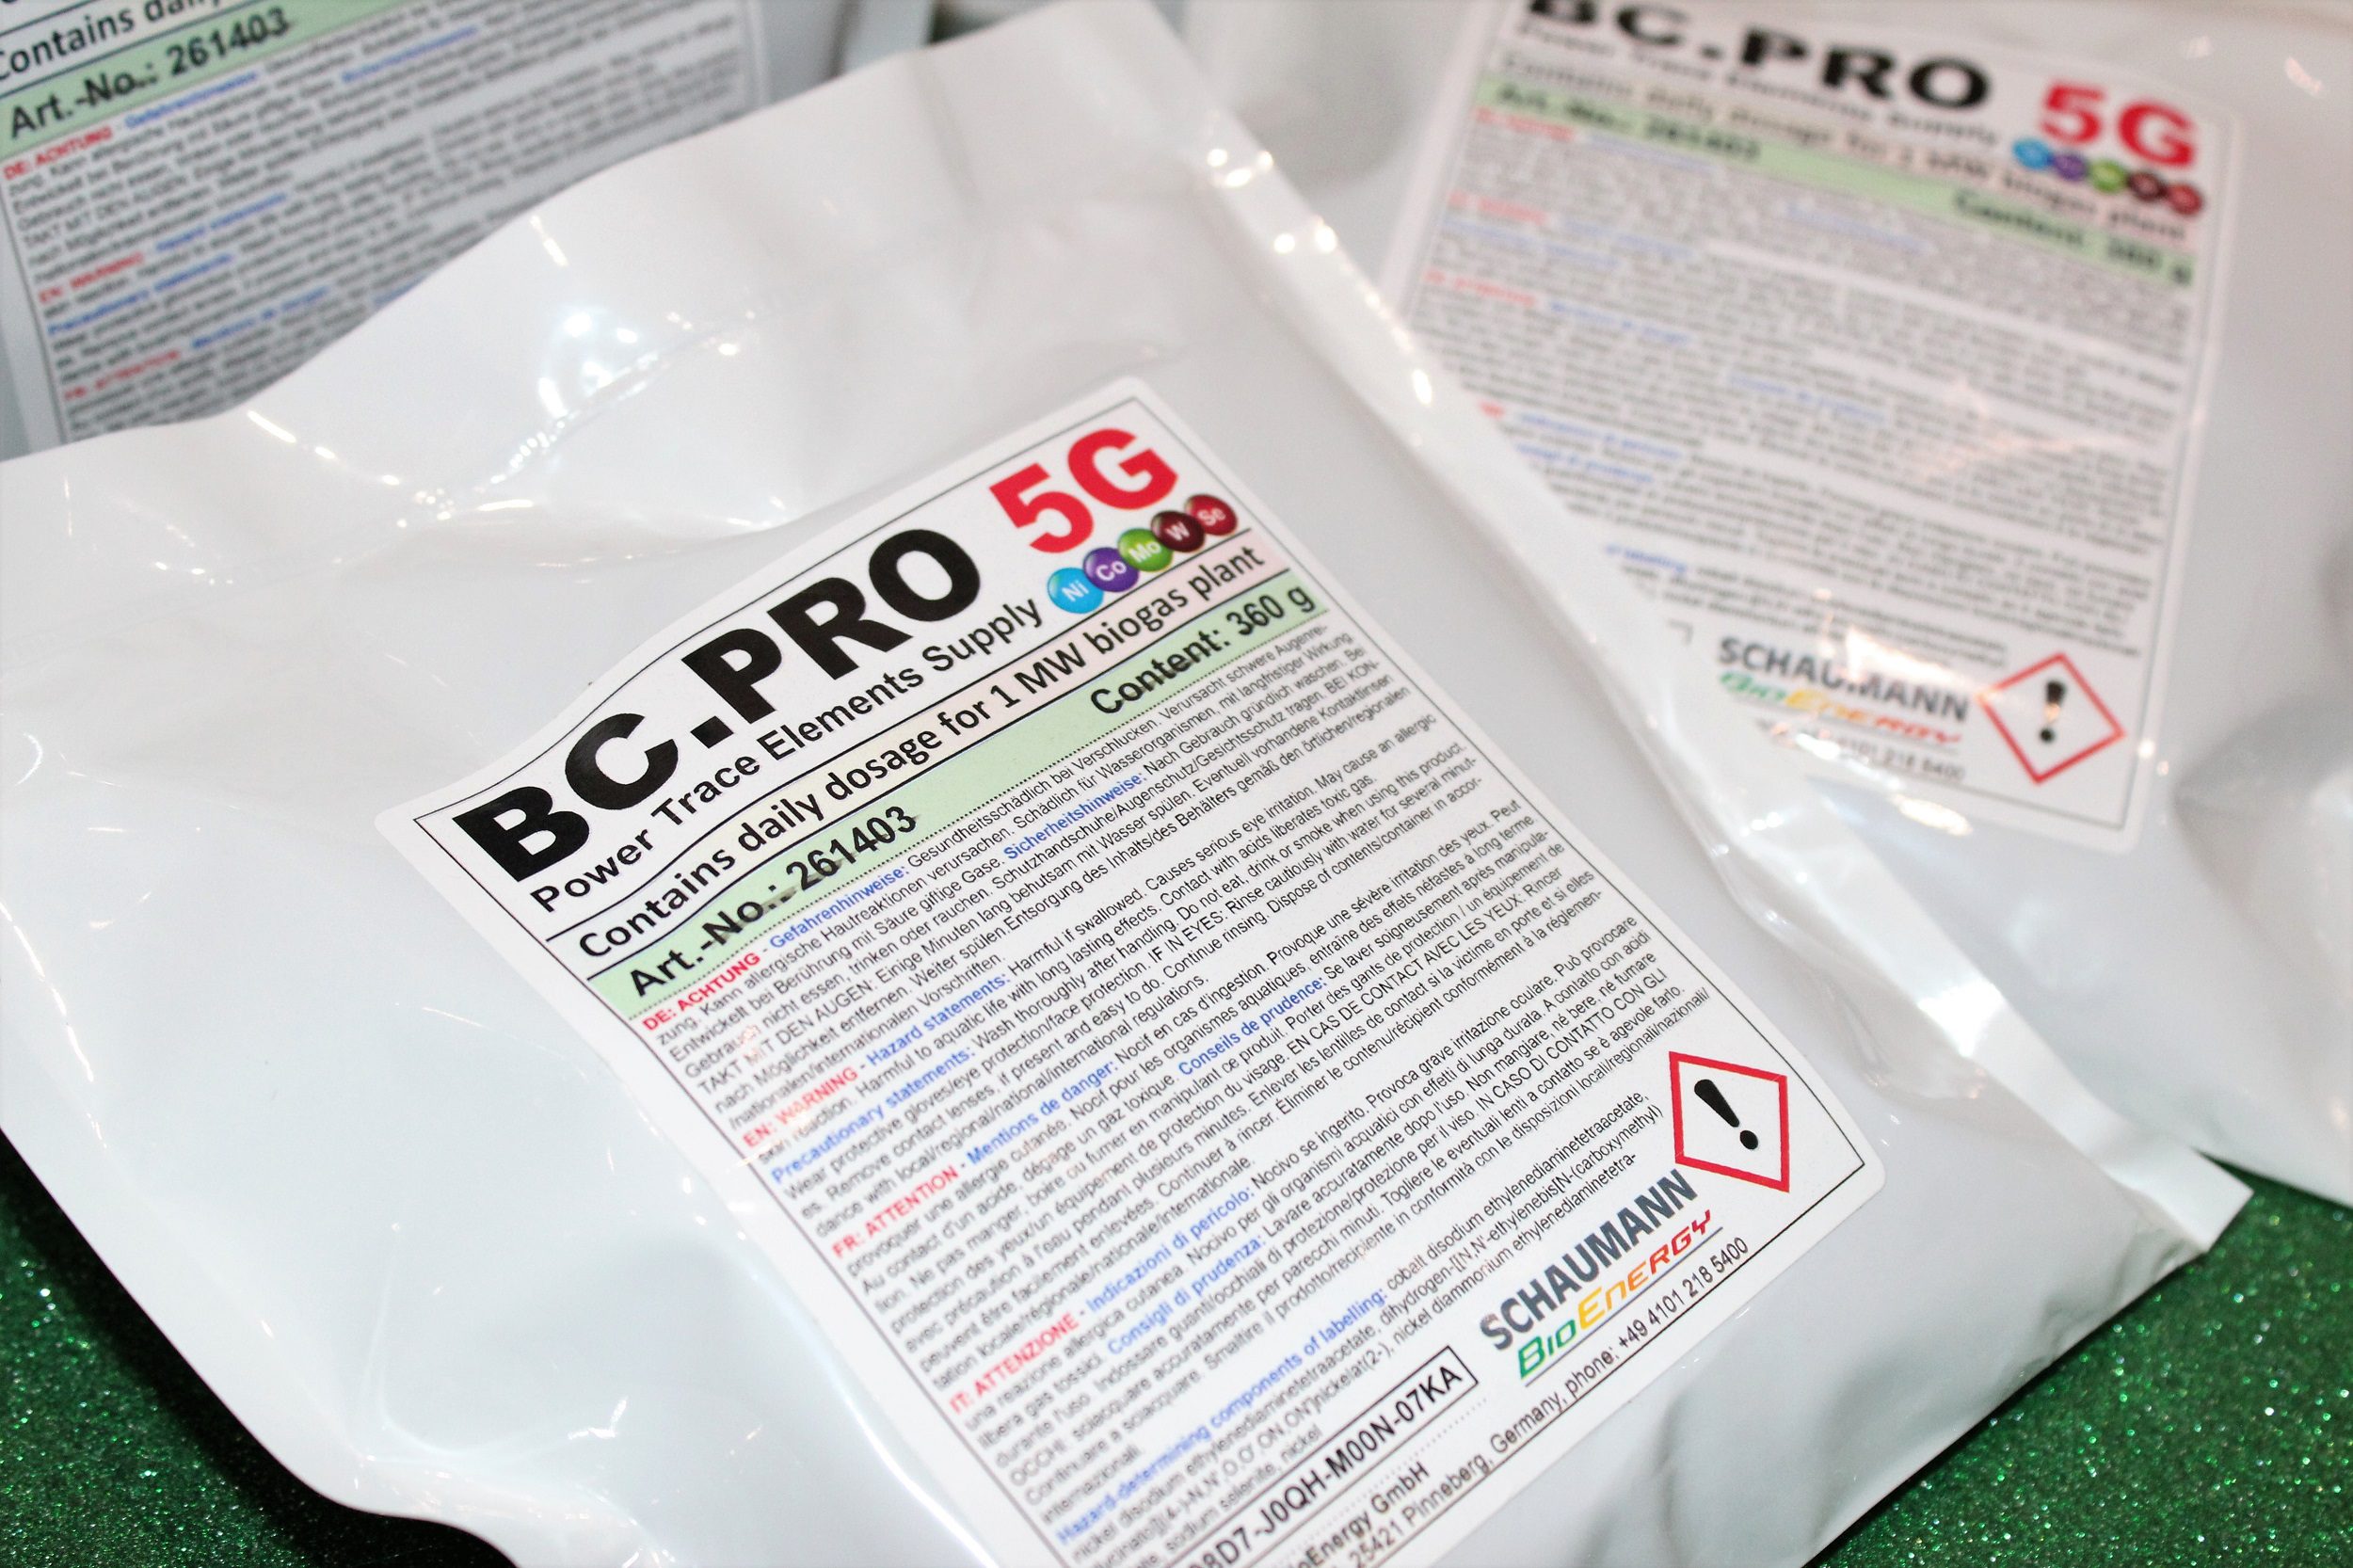 Packages of BC.PRO 5G digester additive